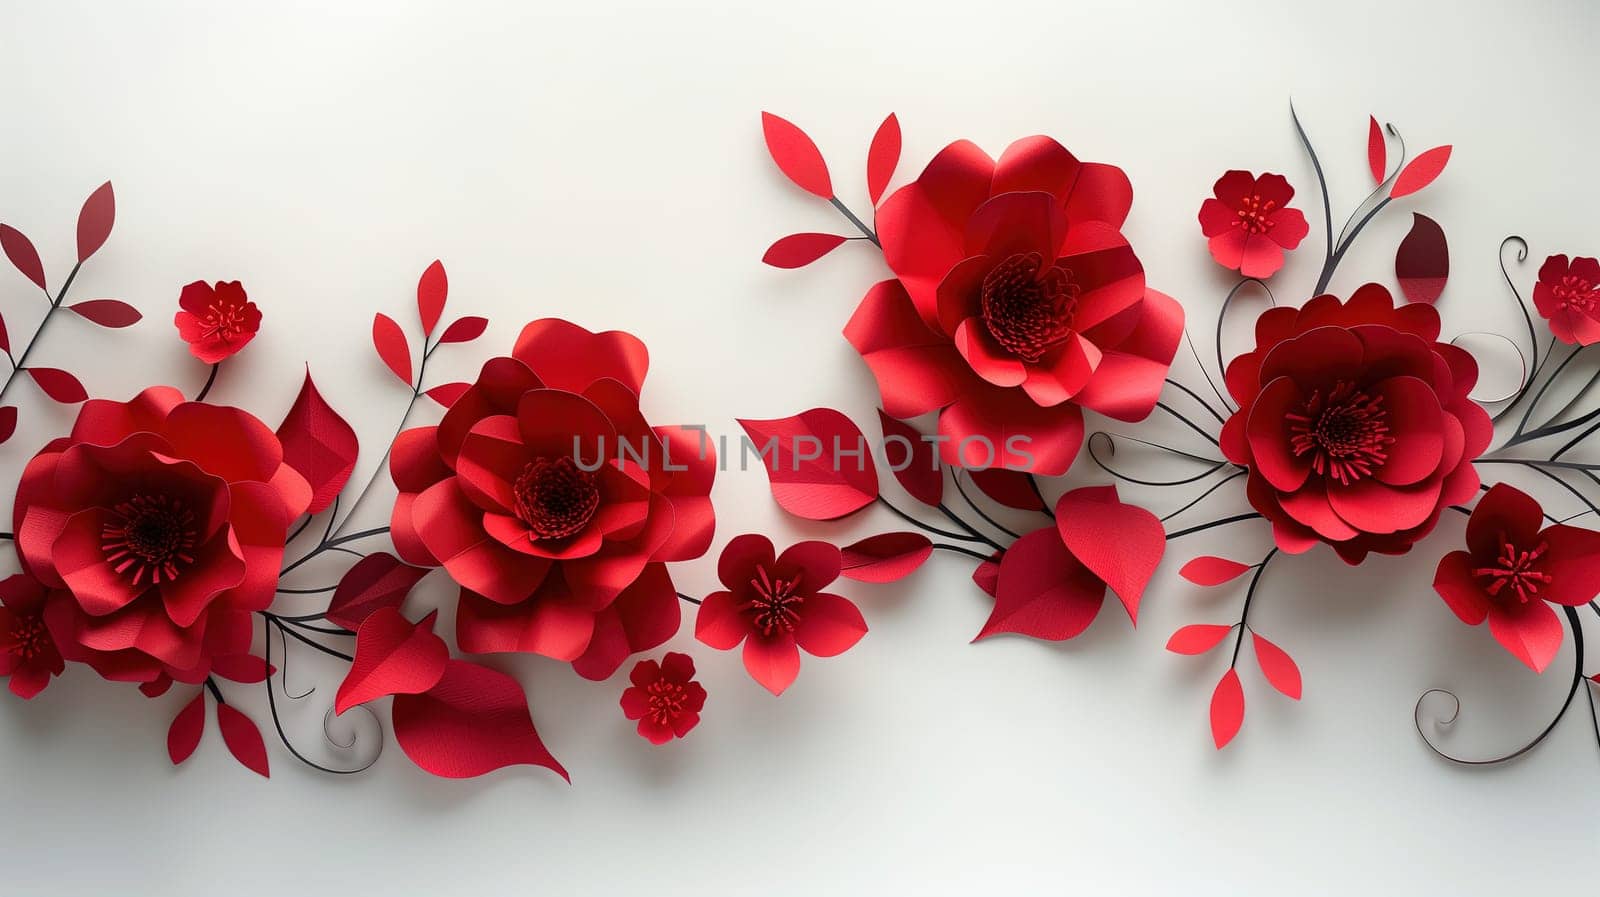 Bright red paper flowers elegantly arranged against a clean white wall, creating a striking visual contrast and adding a pop of color to the room.